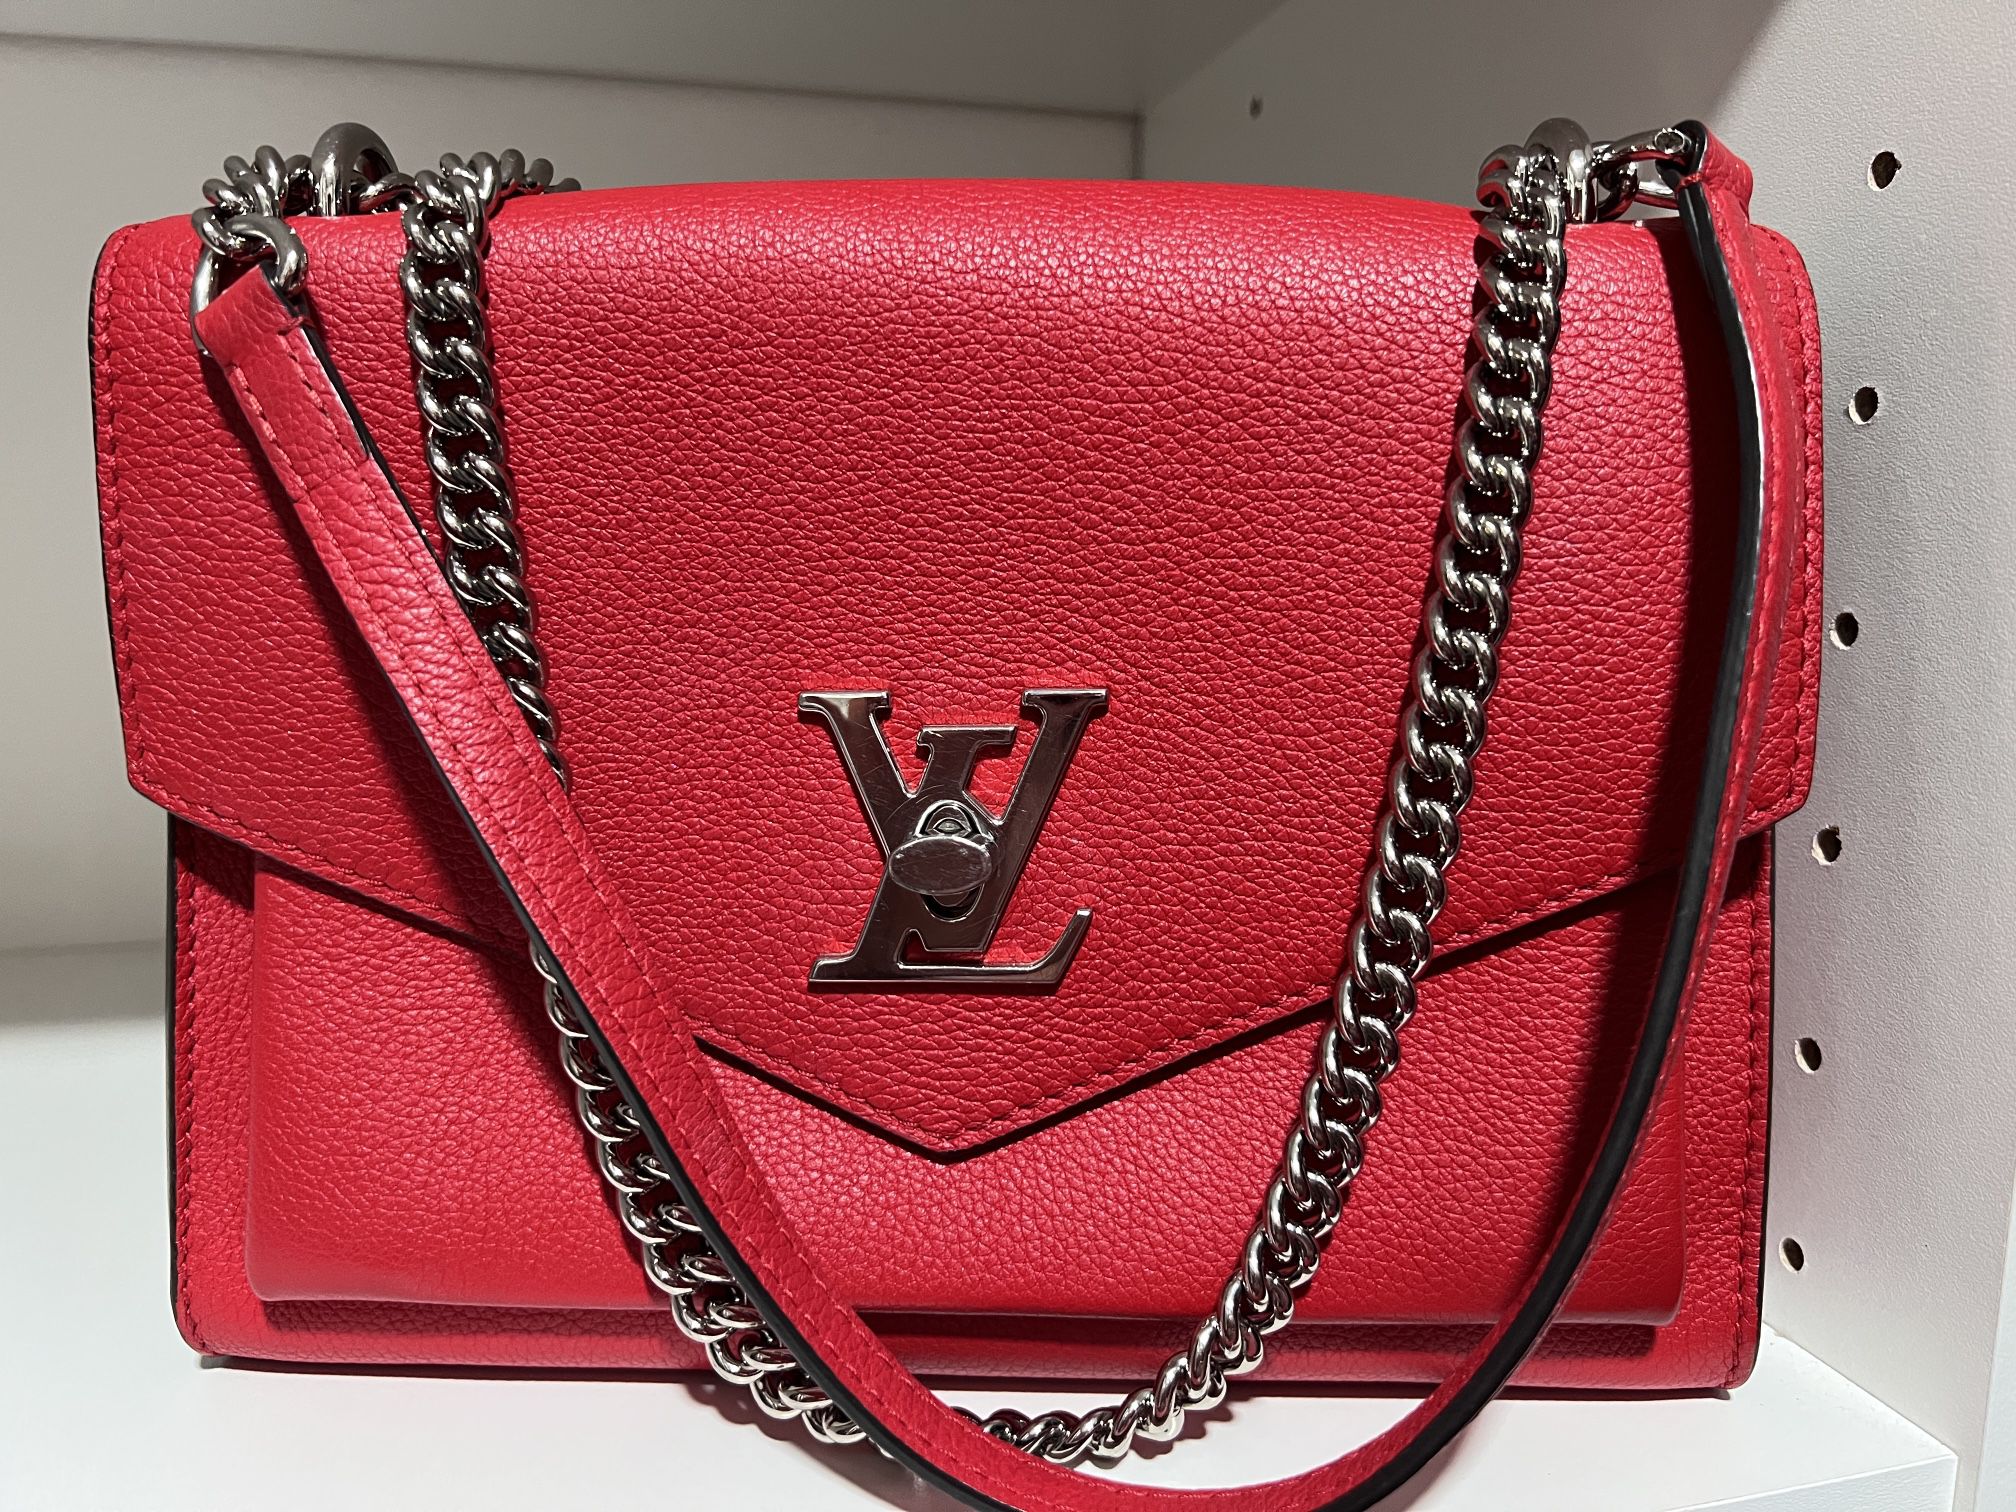 Authentic Mylockme Louis Vuitton Chain Bag for Sale in Boring, OR